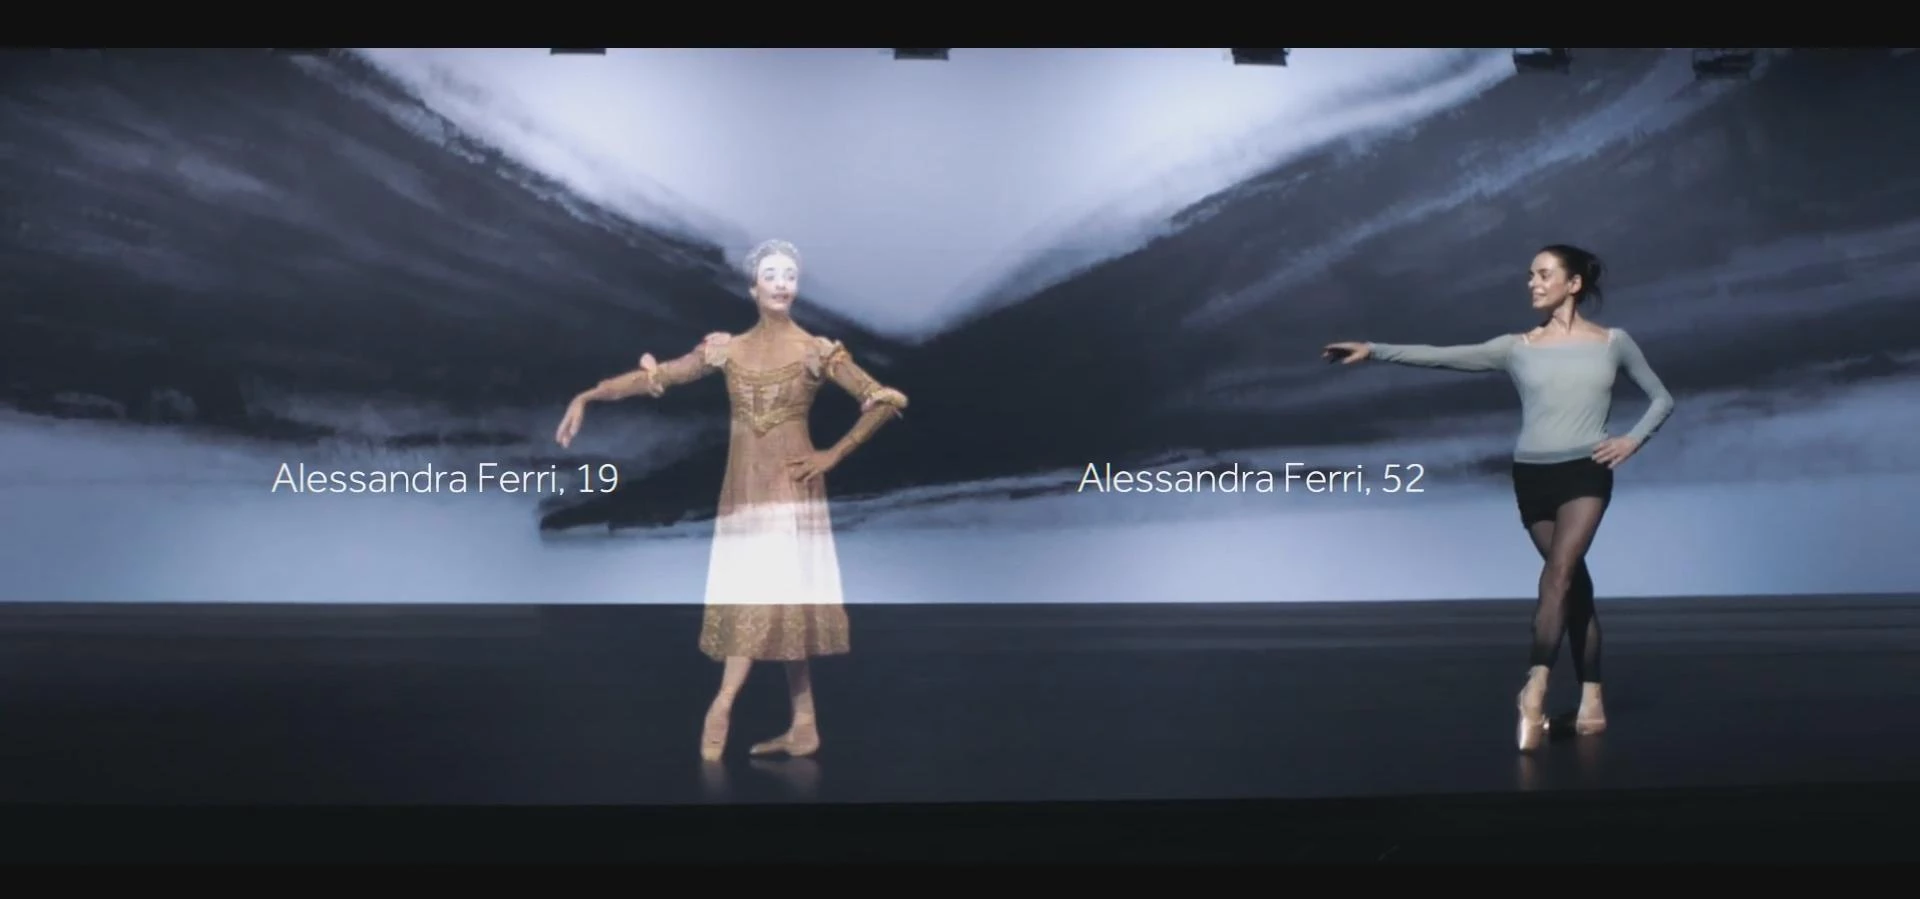 Alessandra Ferri Dancing Alongside a Holographic Projection of Her Younger Self